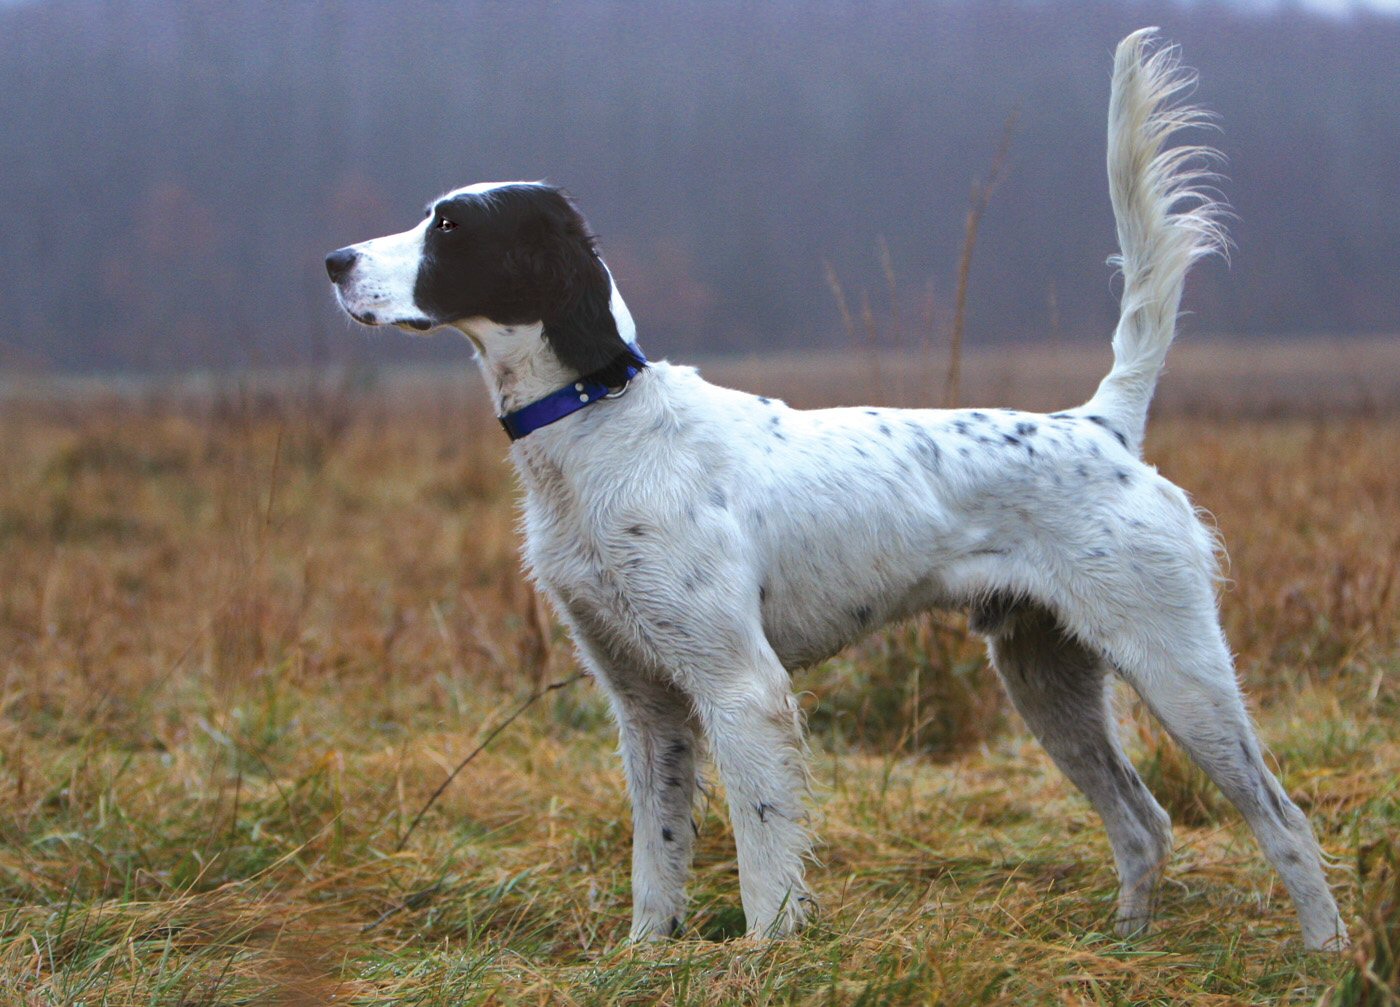 English Setter dog side view photo and wallpaper. Beautiful English Setter dog side view picture